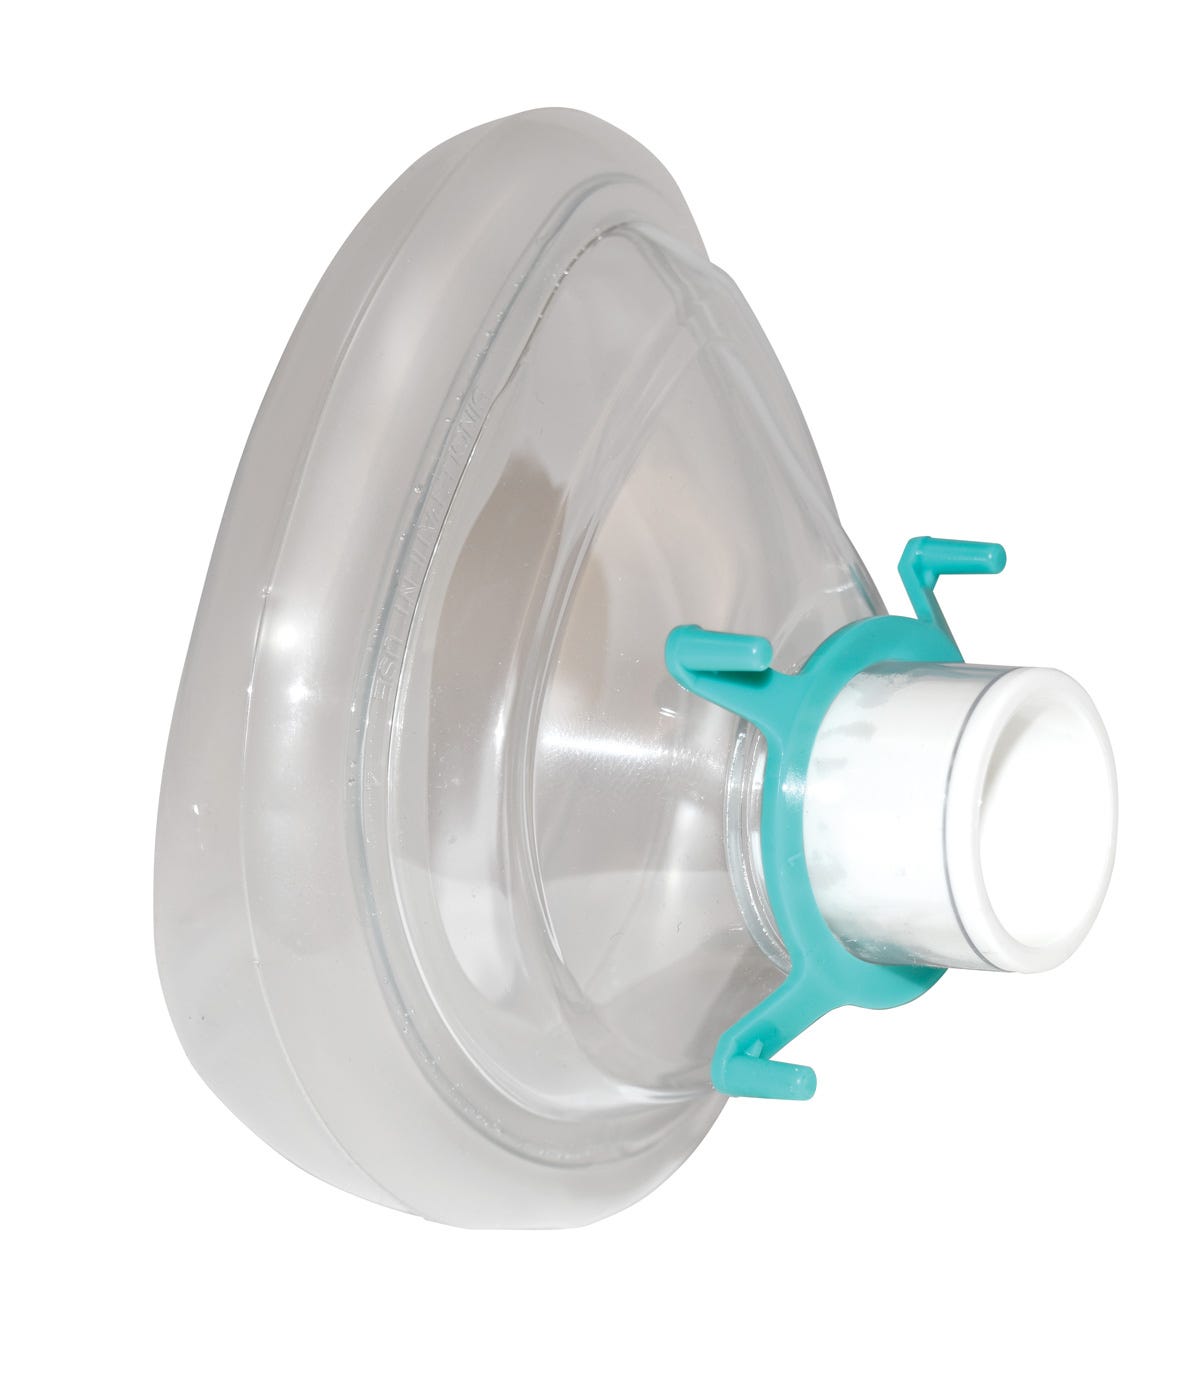 Anesthesia Breathing Mask, Child, Large with Green Hook Ring